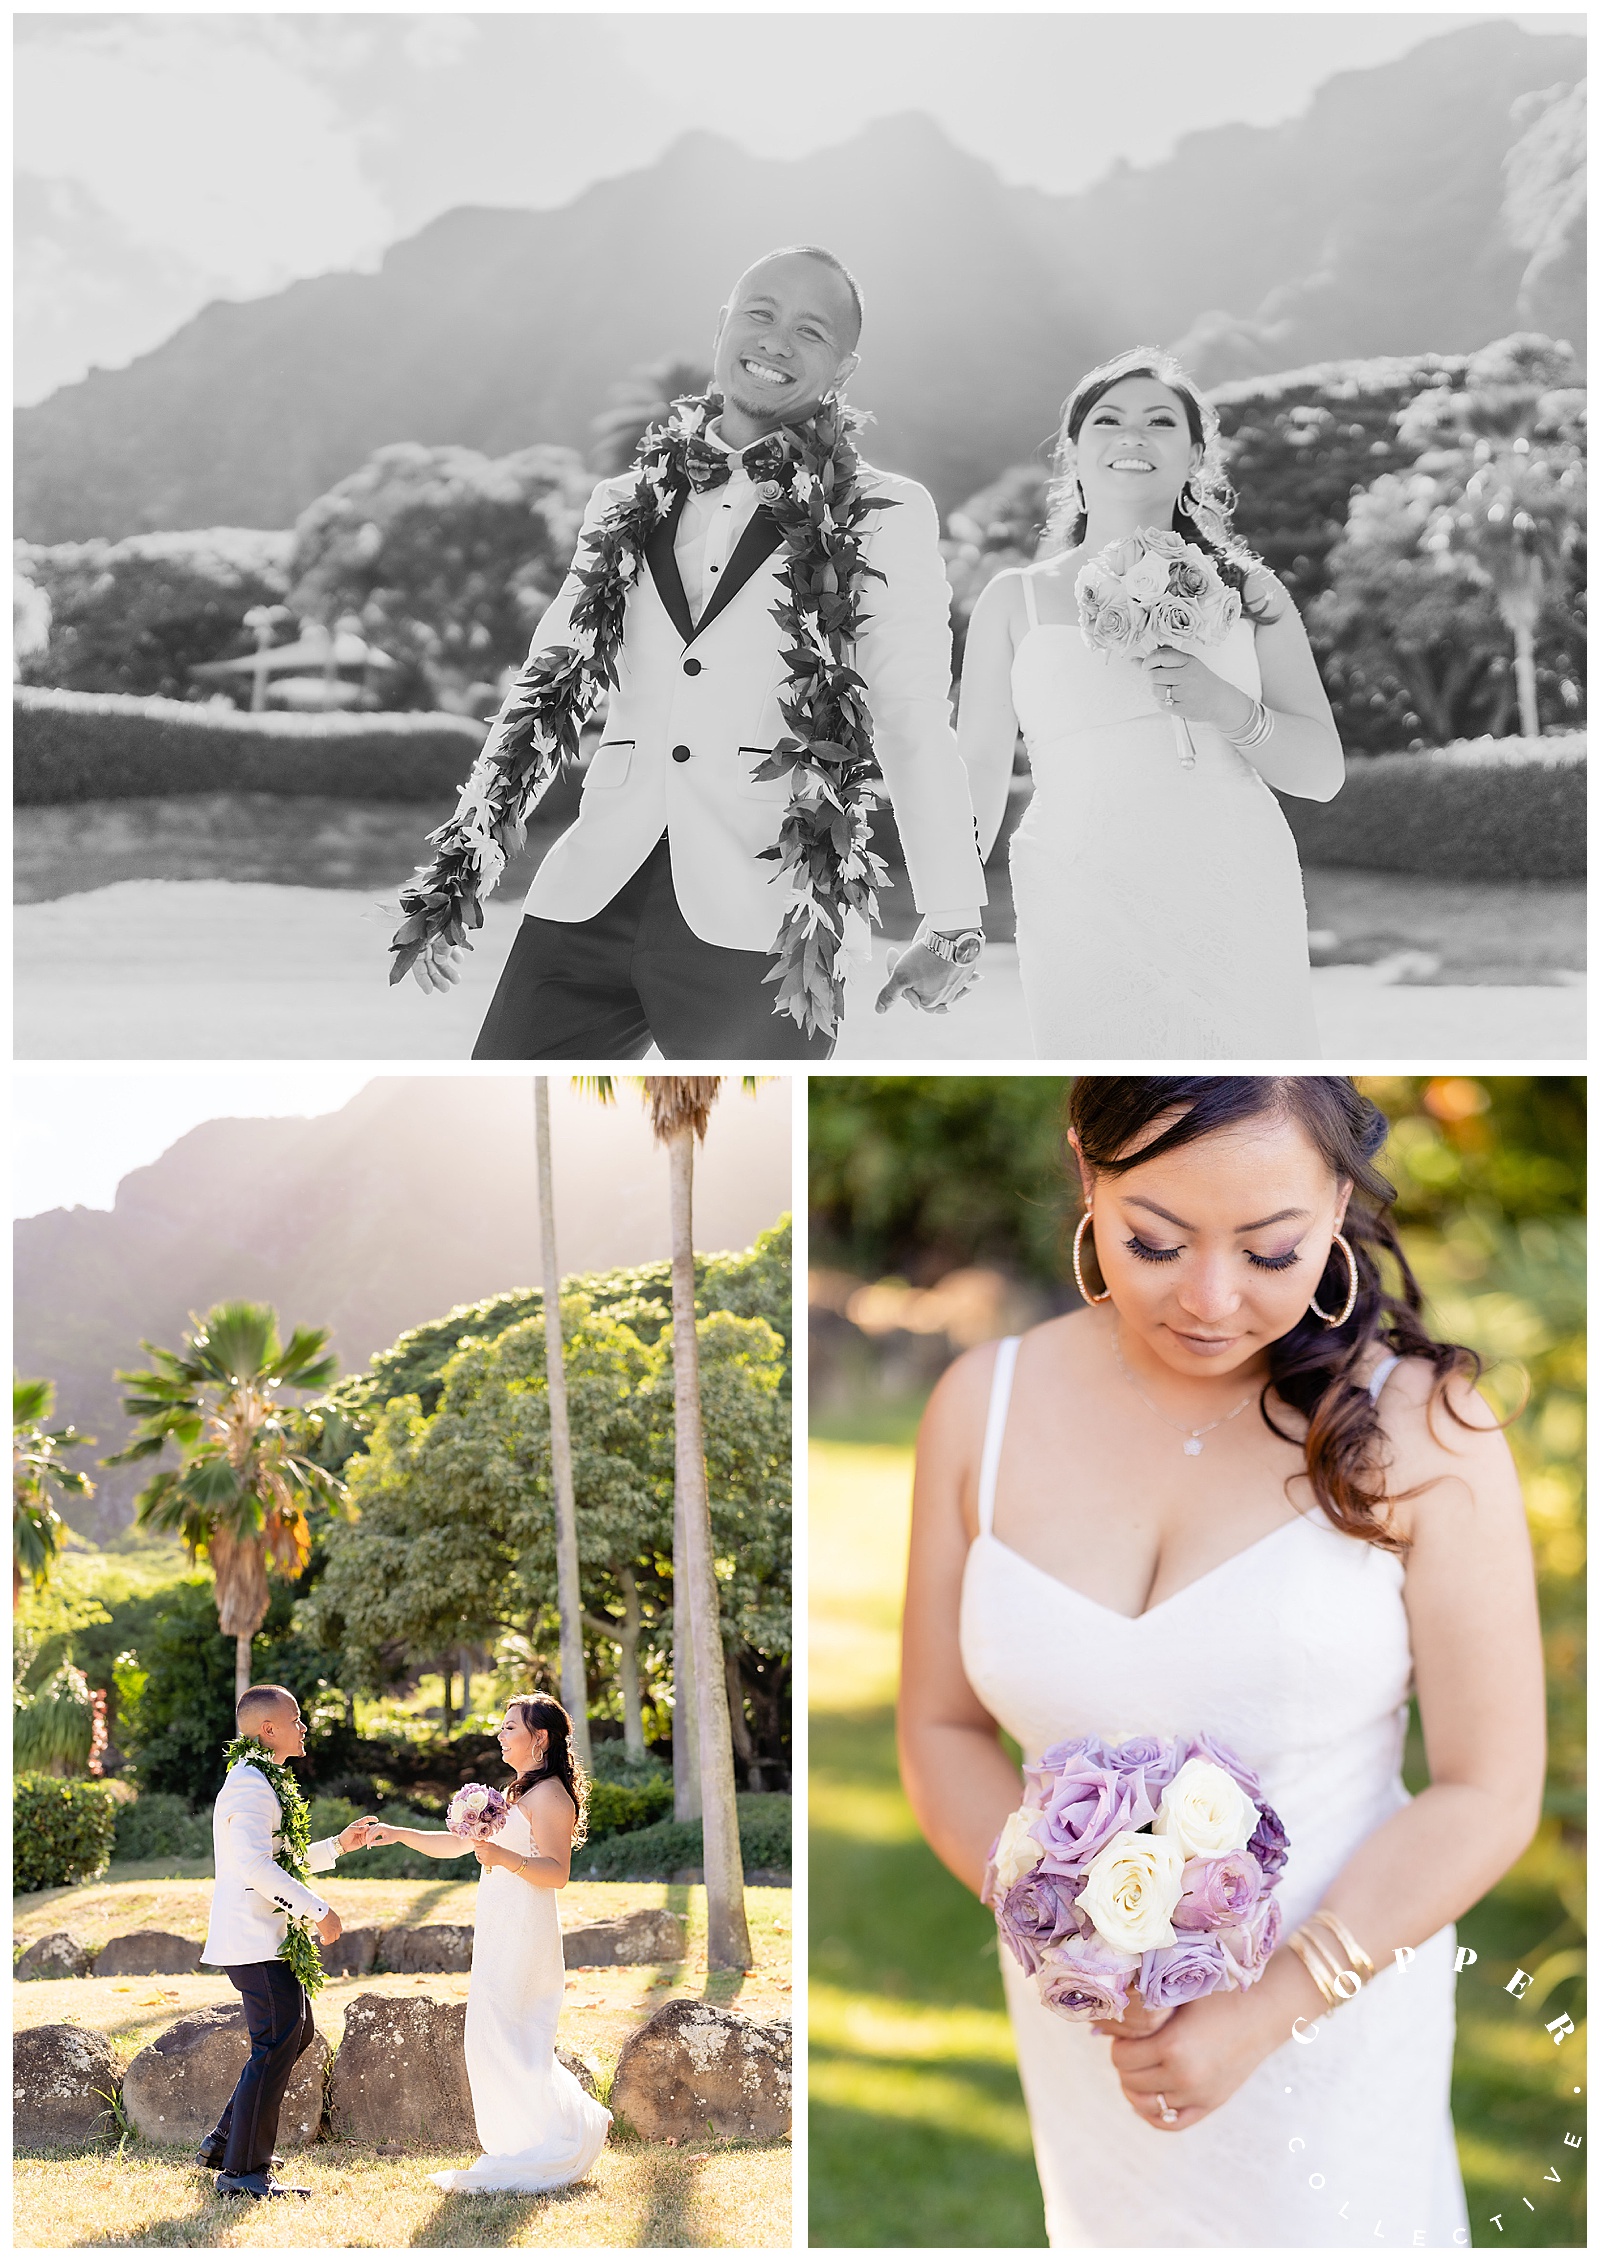 A bride and groom celebrate their wedding ceremony at Kualoa Ranch